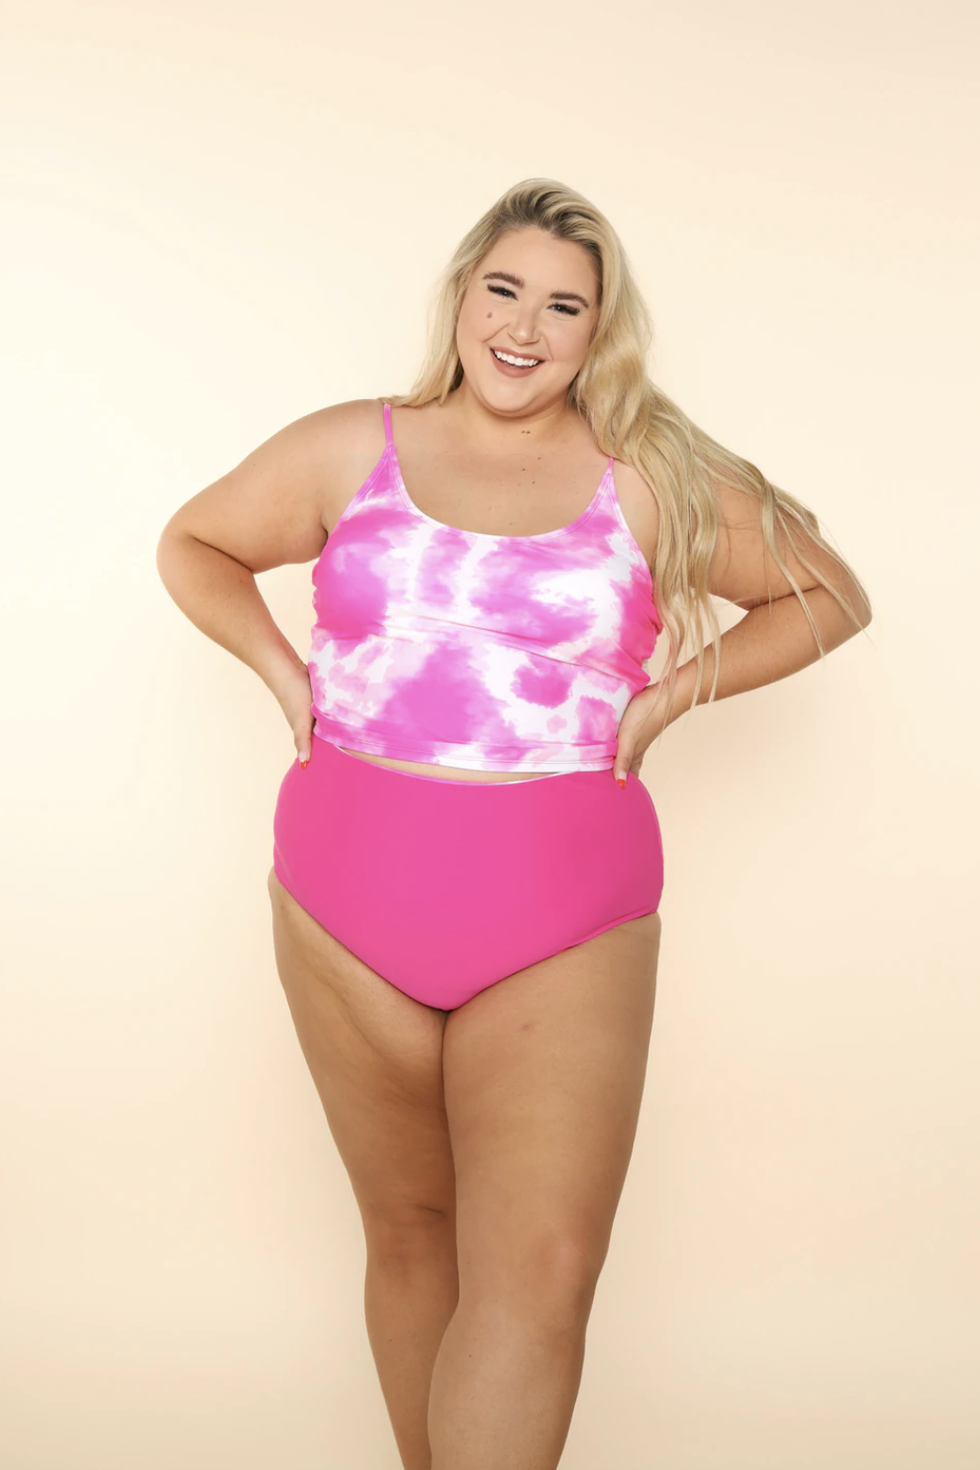 Calling all mermaids: Make a splash with these size-inclusive swimwear  looks, from $24